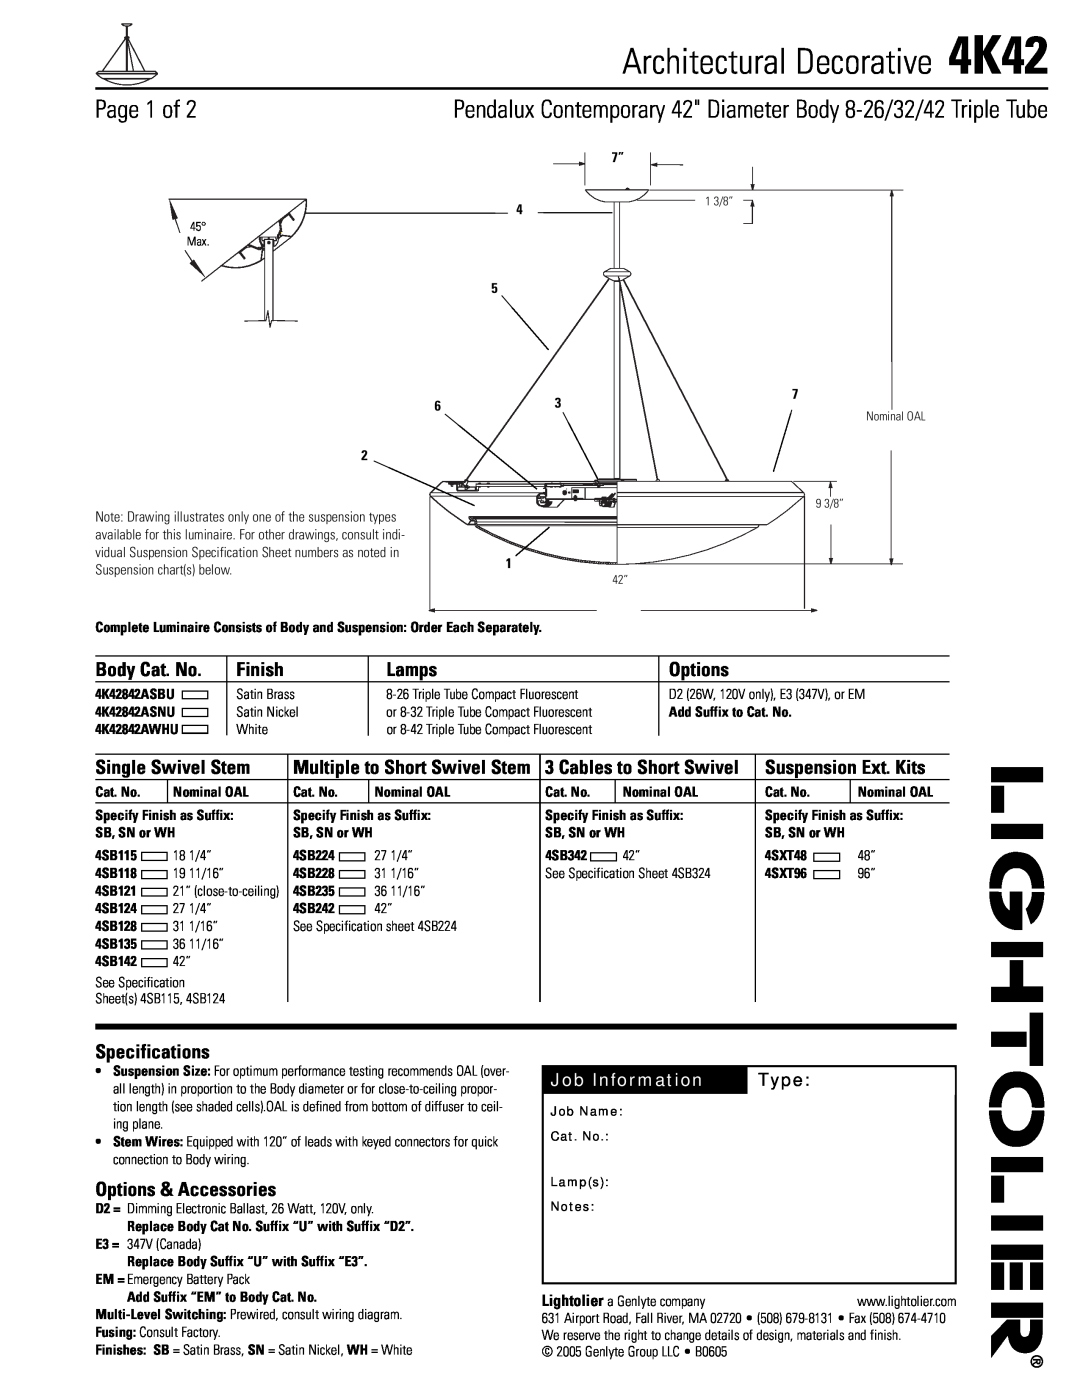 Lightolier specifications Architectural Decorative 4K42, Page 1 of, Body Cat. No, Finish, Lamps, Options, Type 